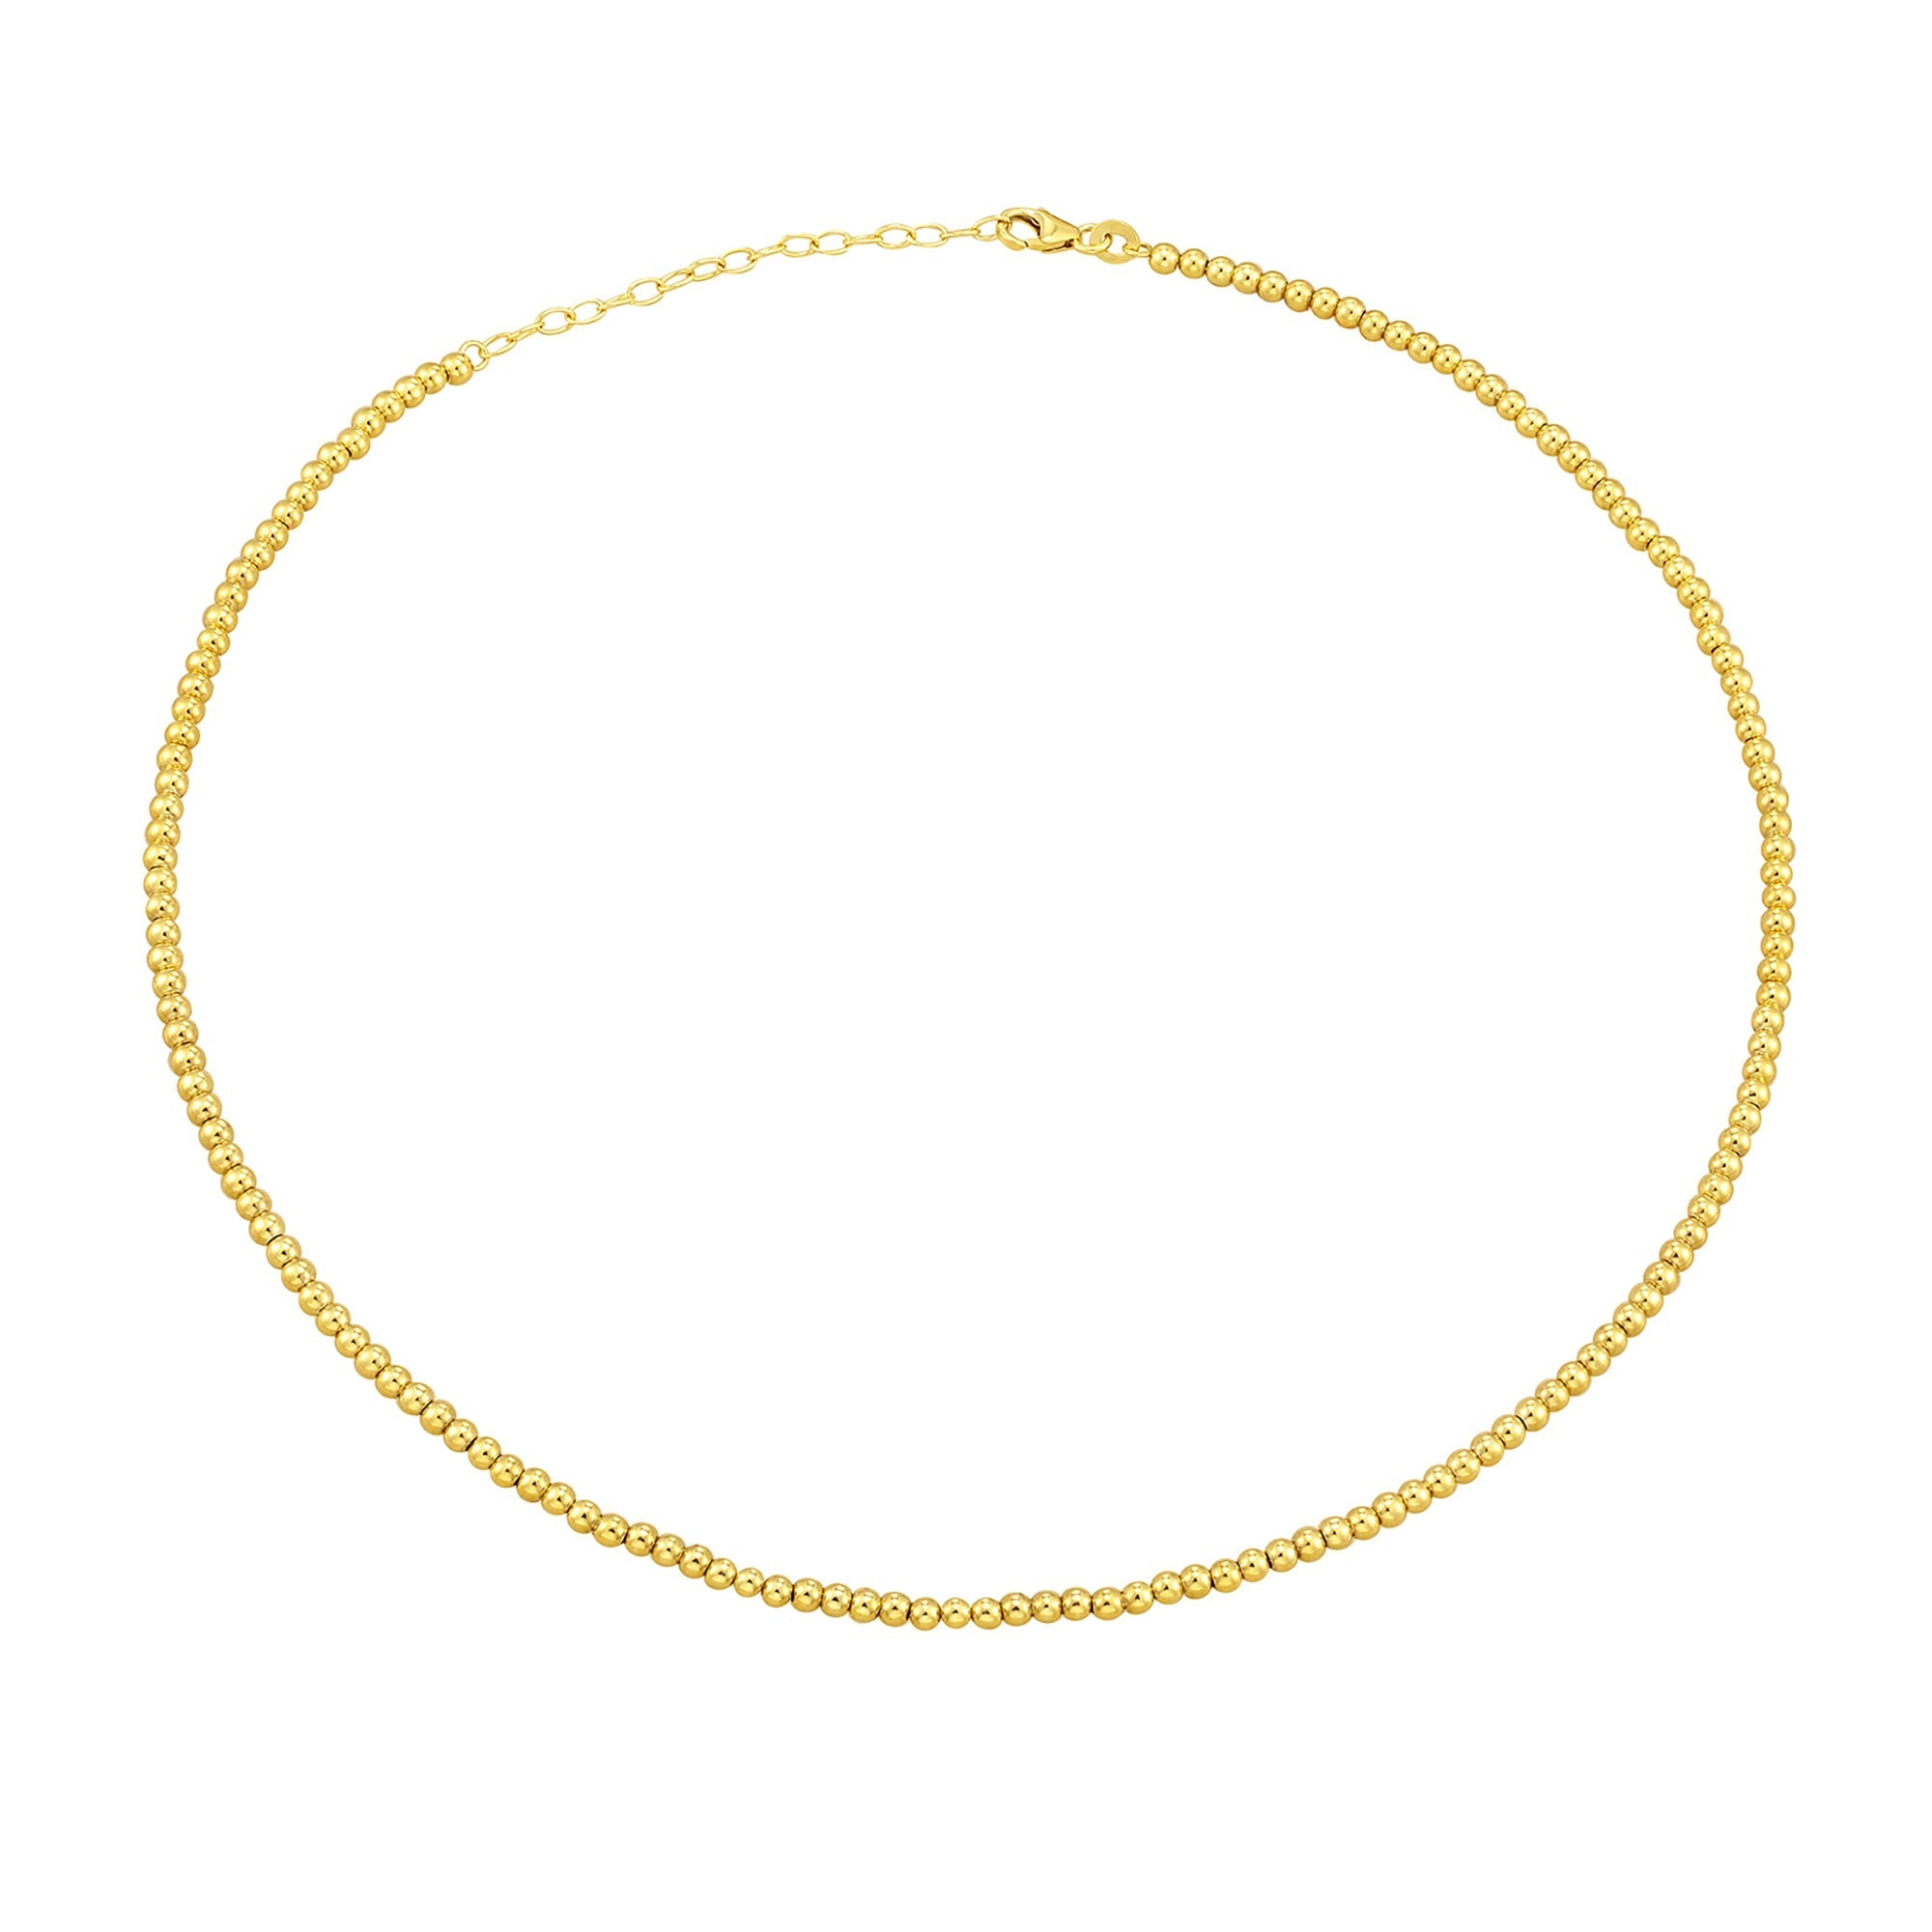 bead necklace - seol gold